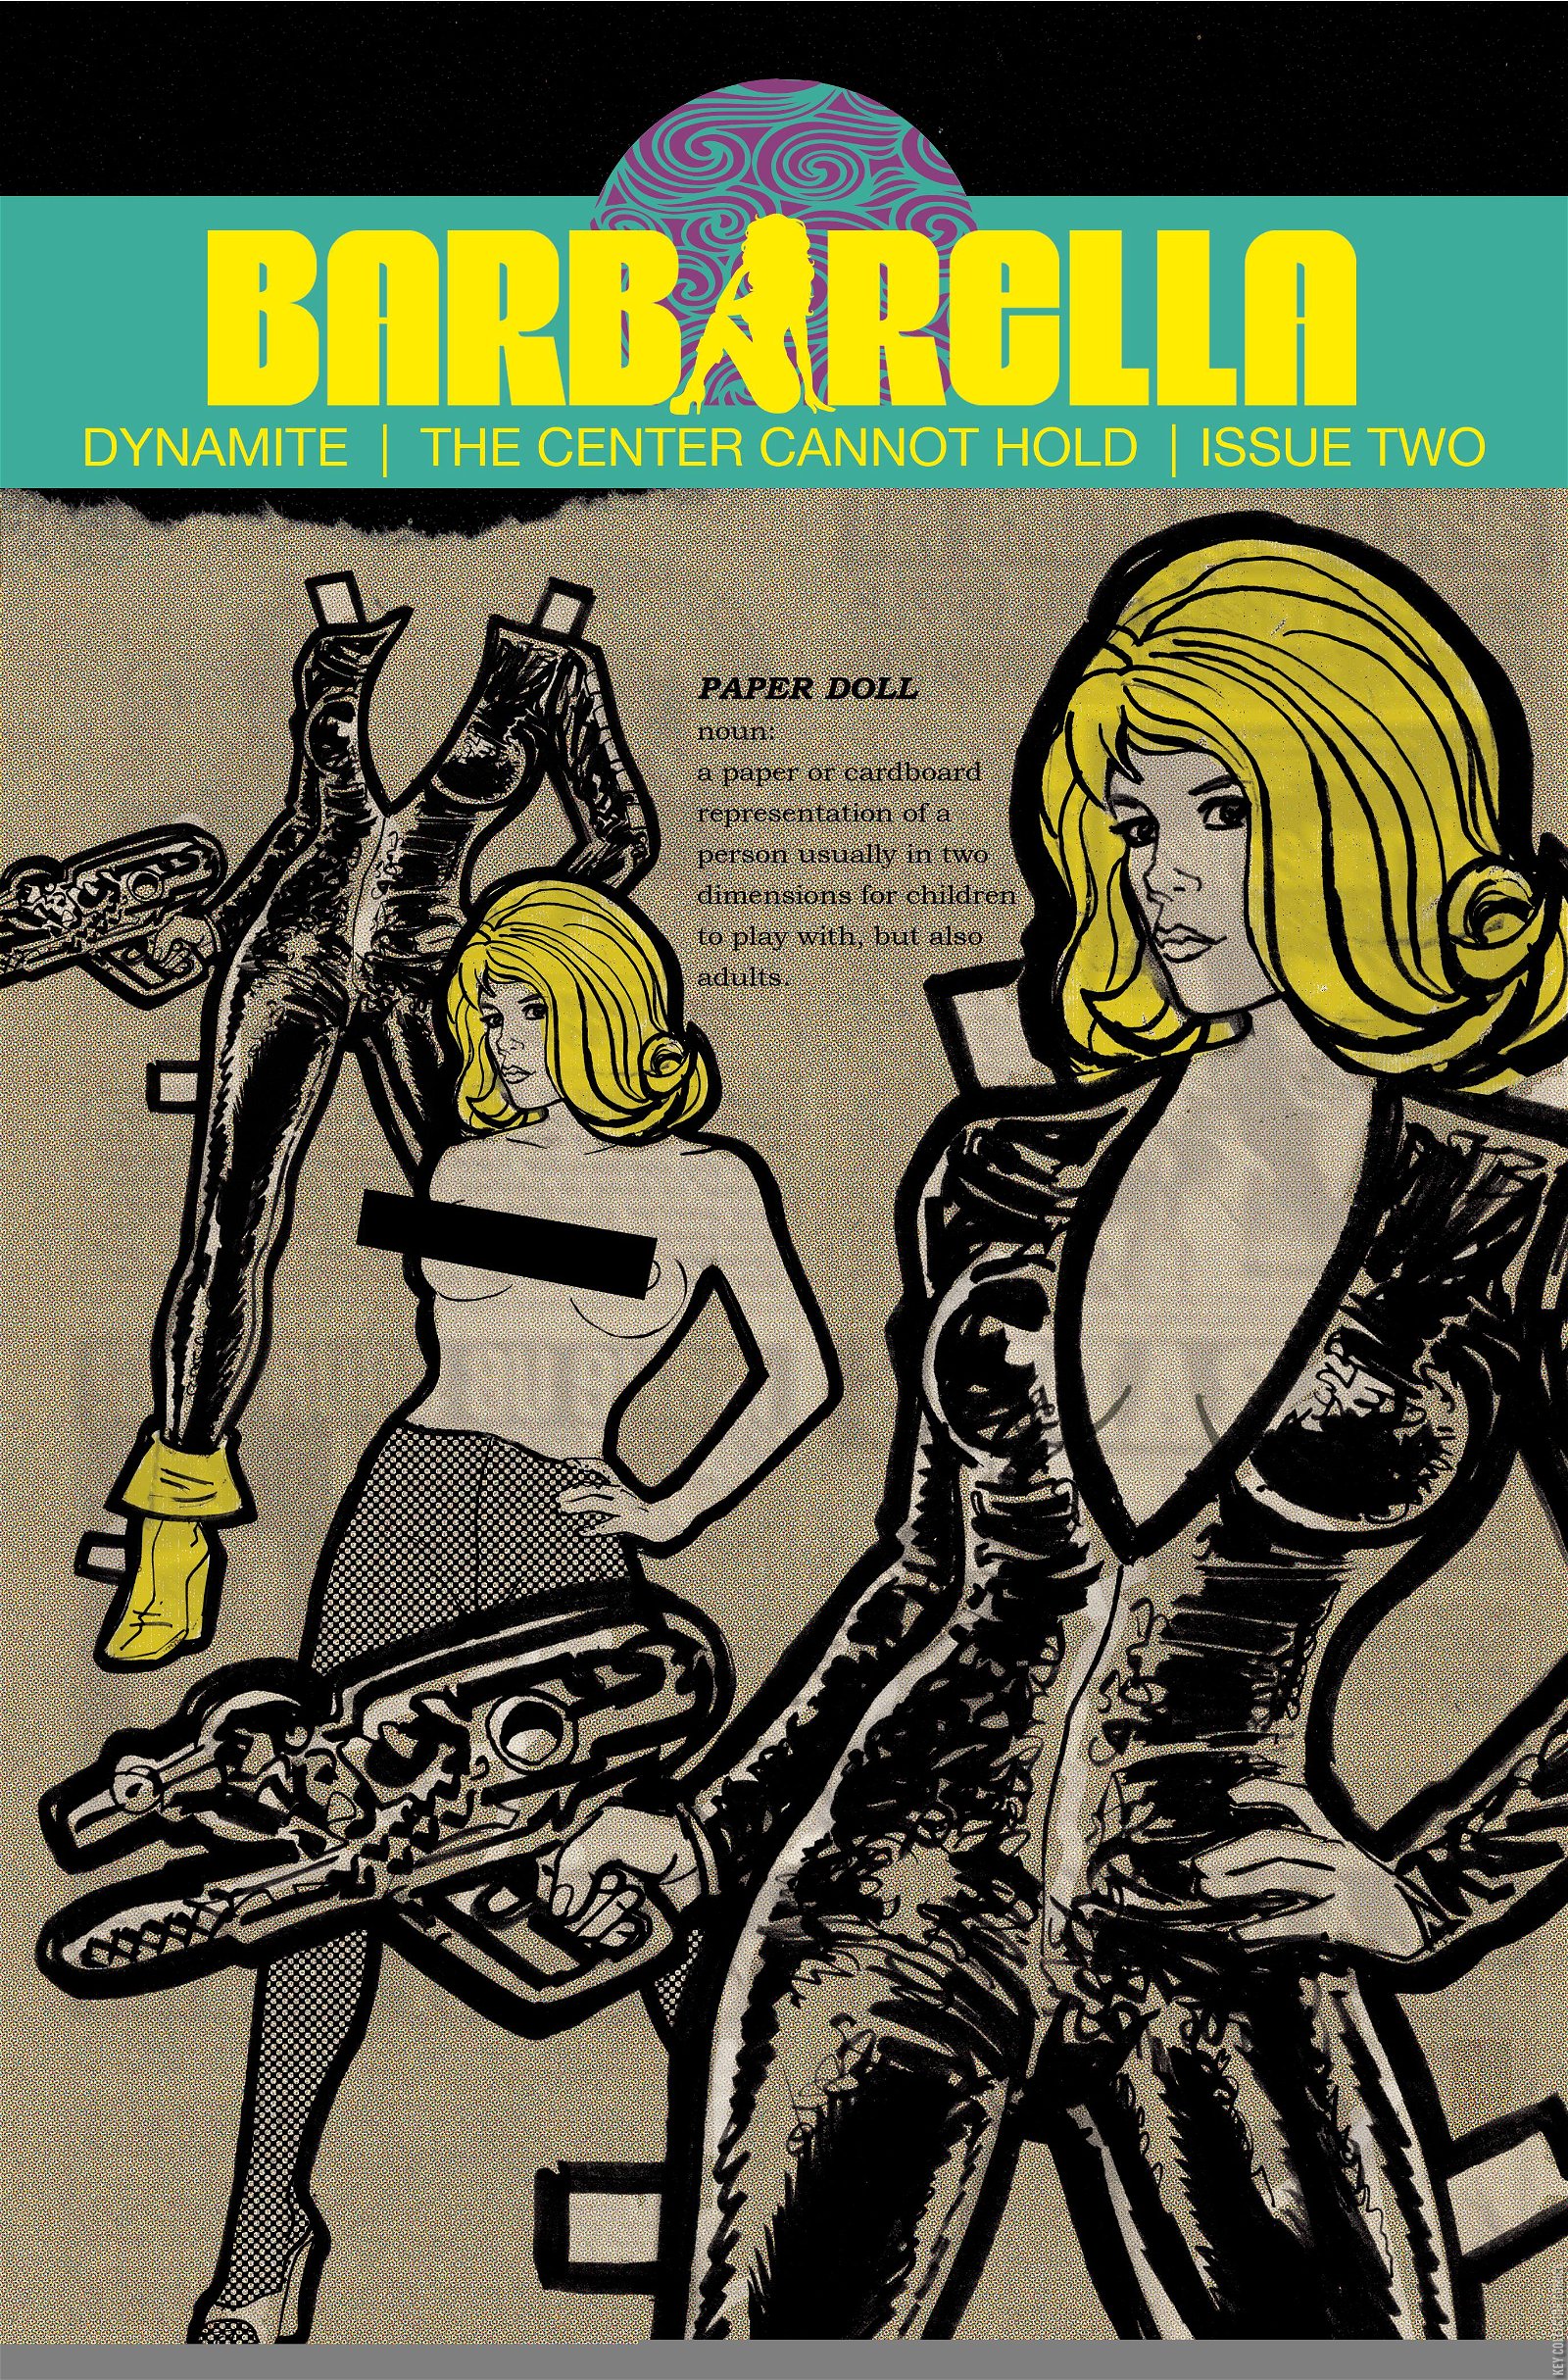 Barbarella: The Center Cannot Hold #2